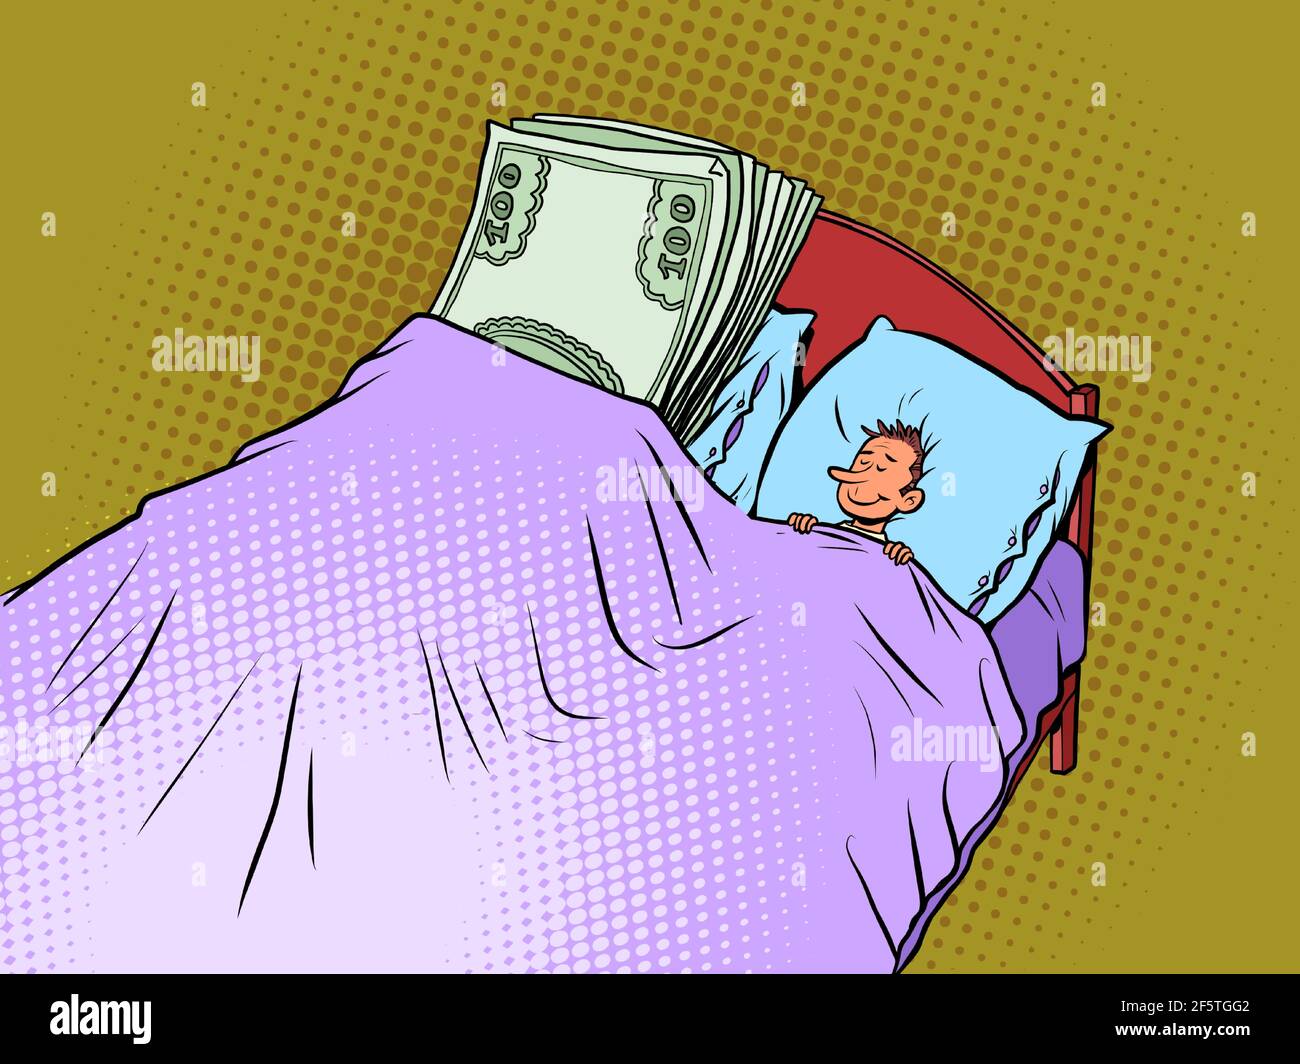 A man sleeps with money in his bed. Business and Finance Stock Vector